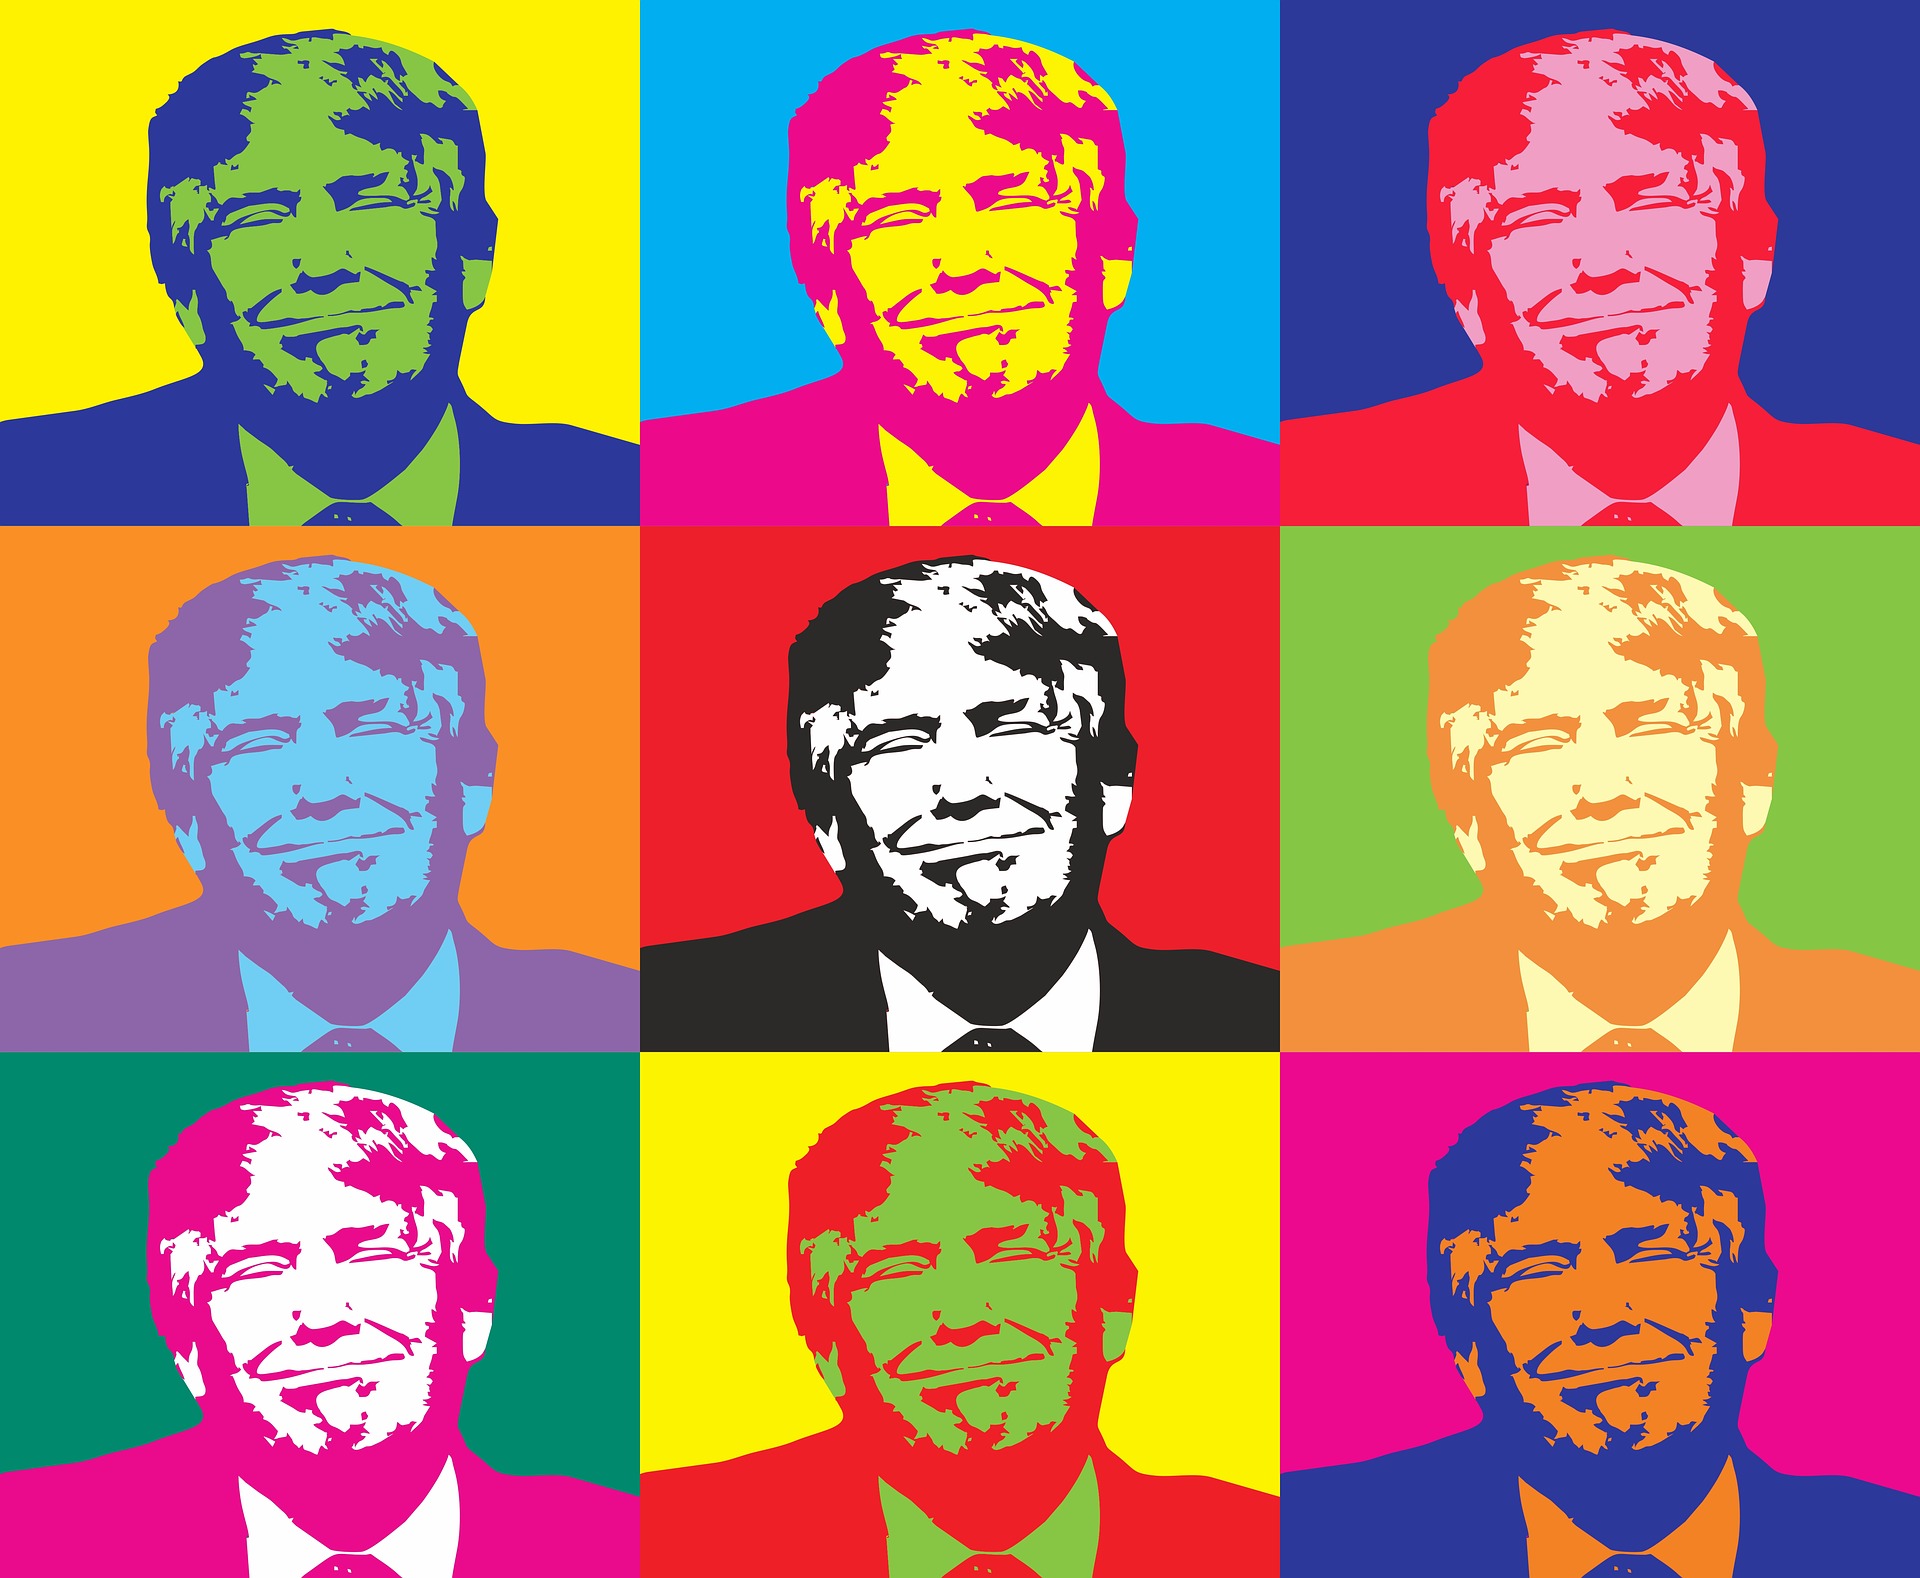 A series of images of former US president Donald Trump in the style of Andy Warhol